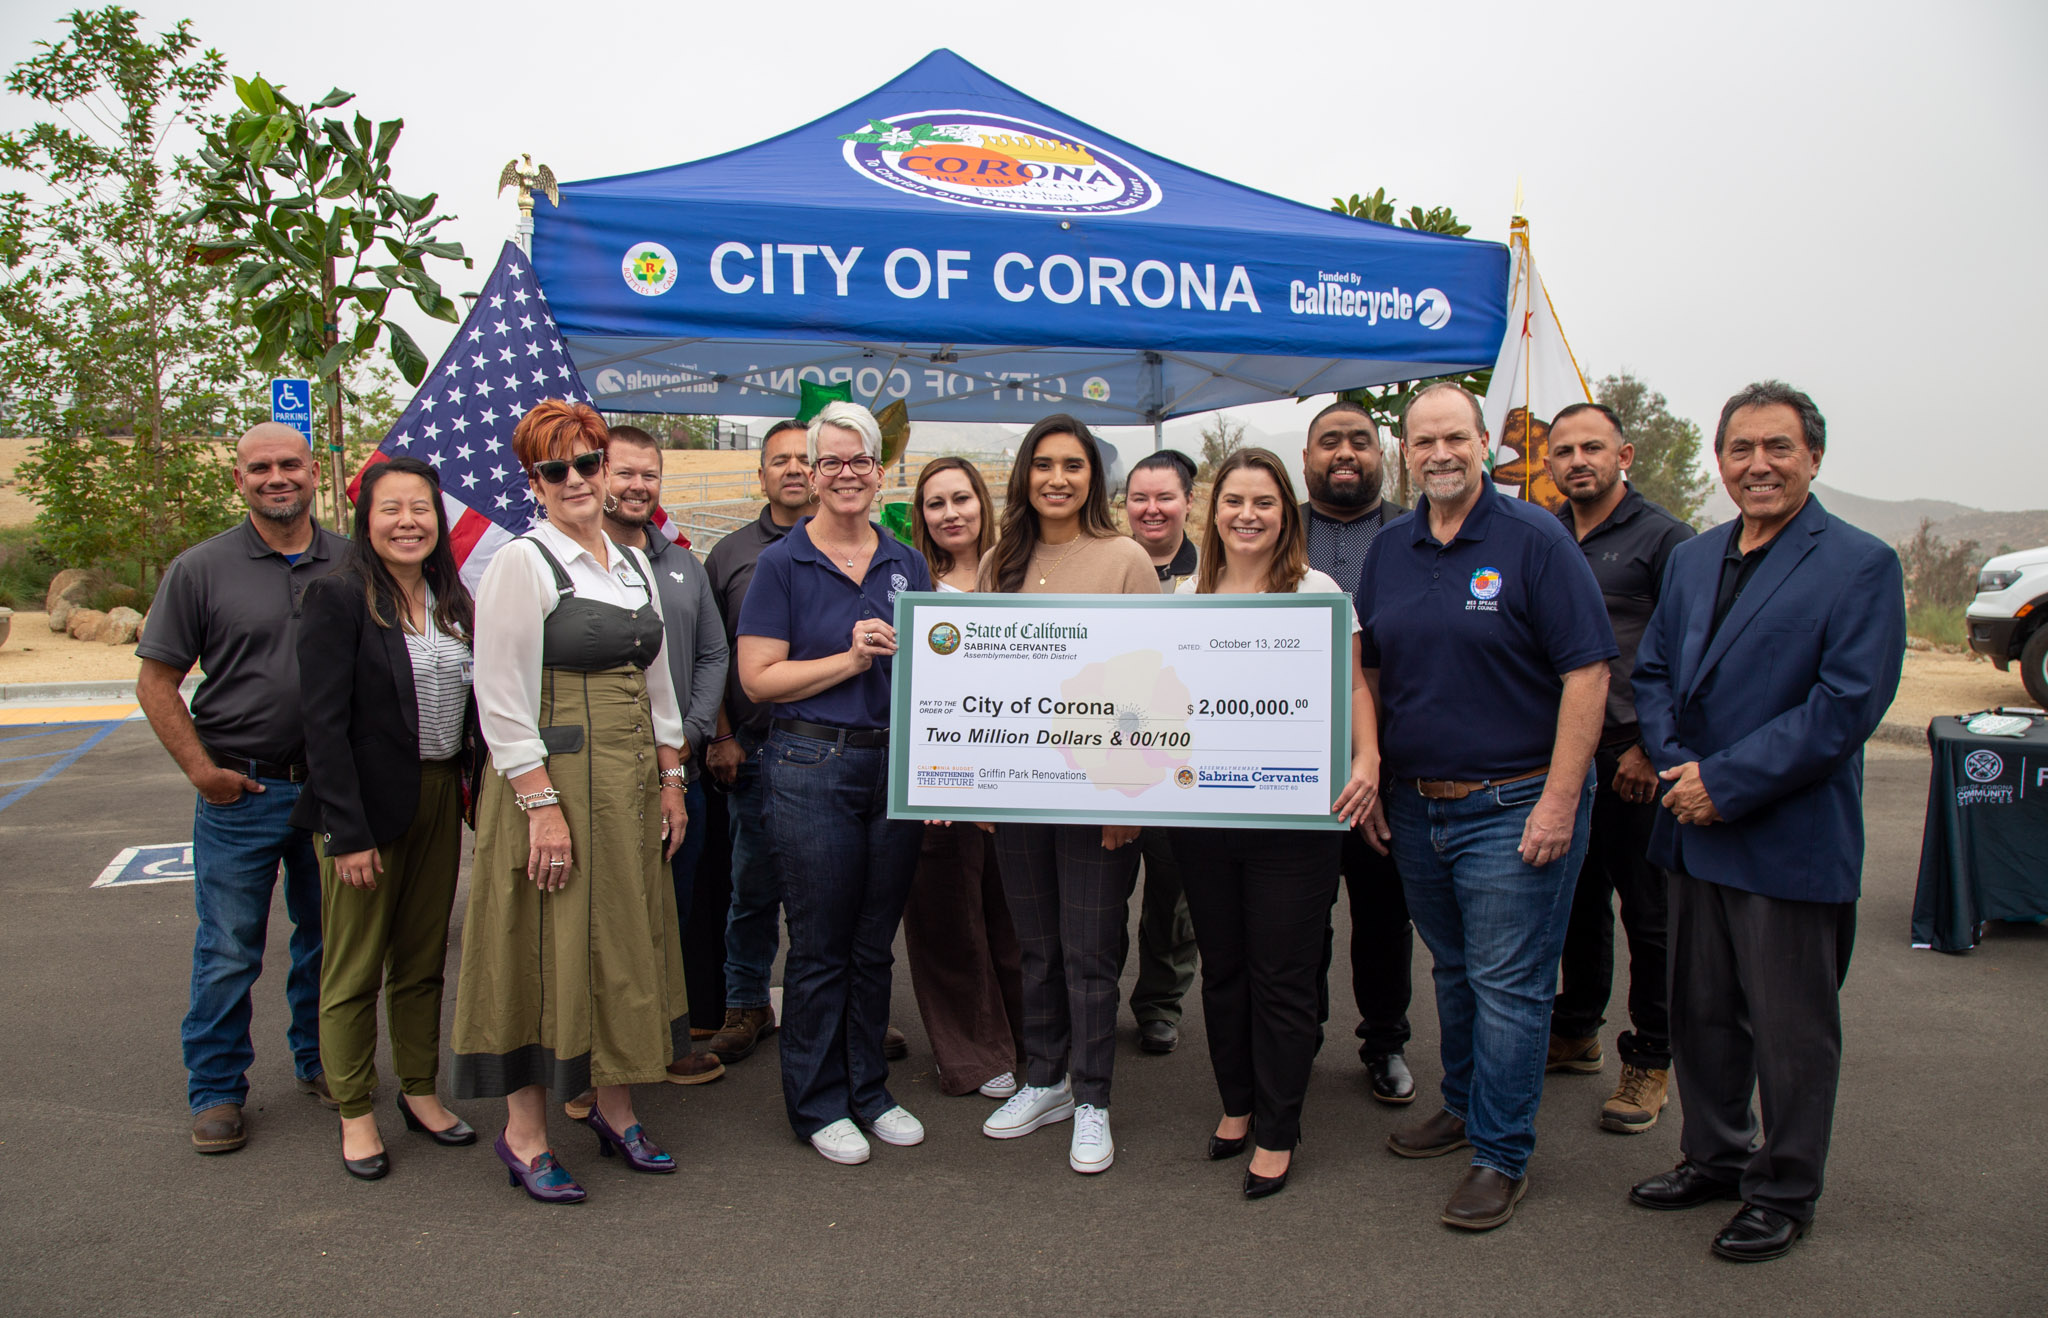 Assemblymember Sabrina Cervantes and City of Corona representatives holding a large oversized check of $2 million for Griffin Park